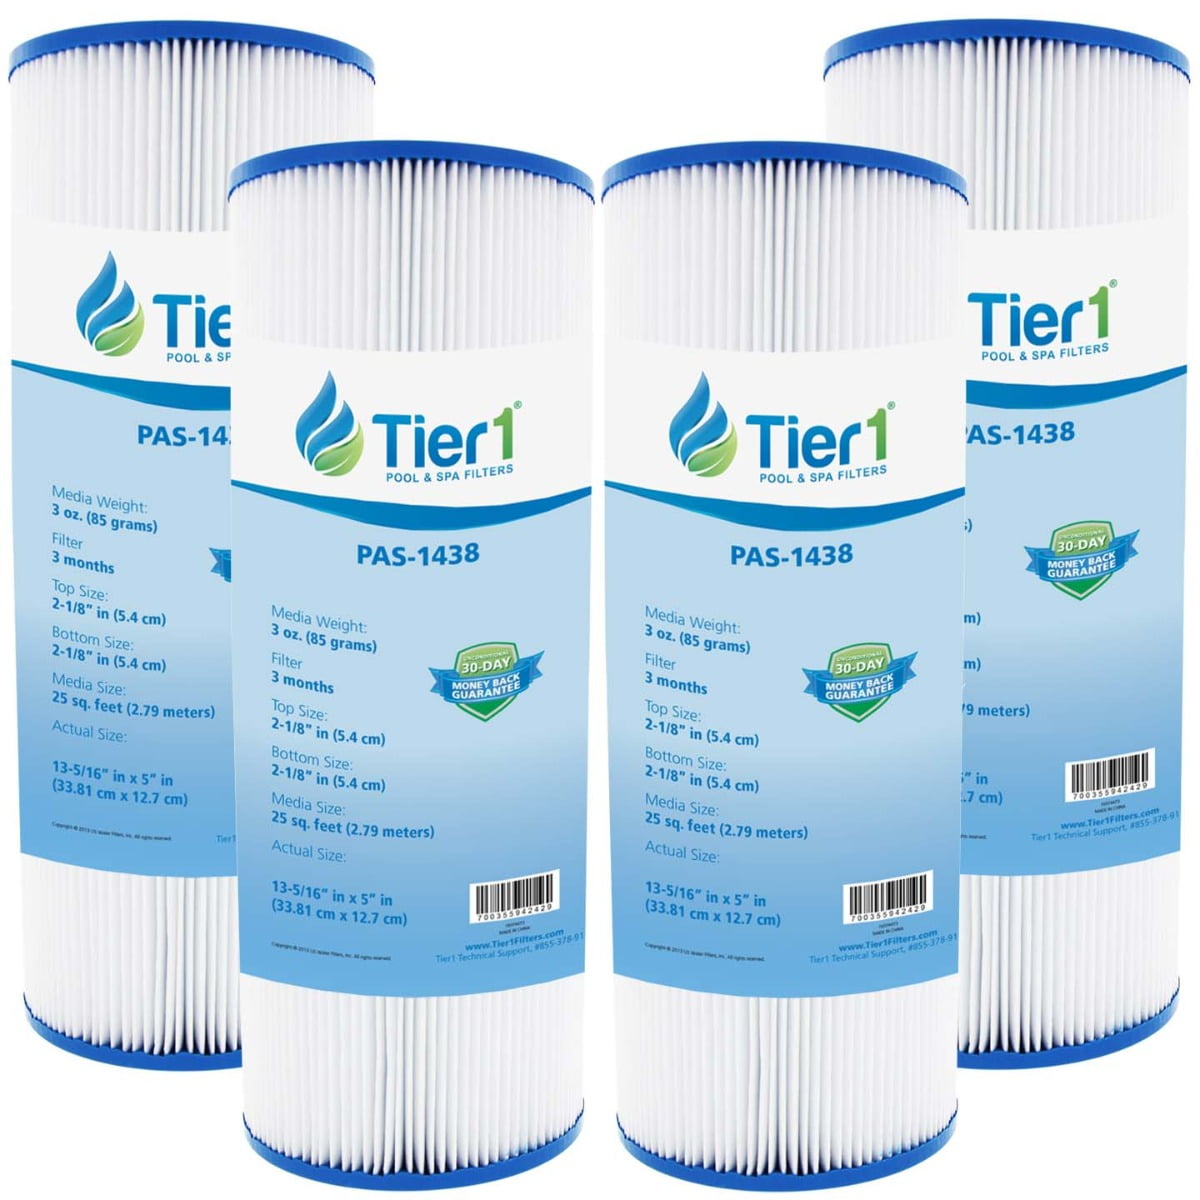 10 1/2 in 5 7/8 in x L Tier1 Pool & Spa replacement filter size D 